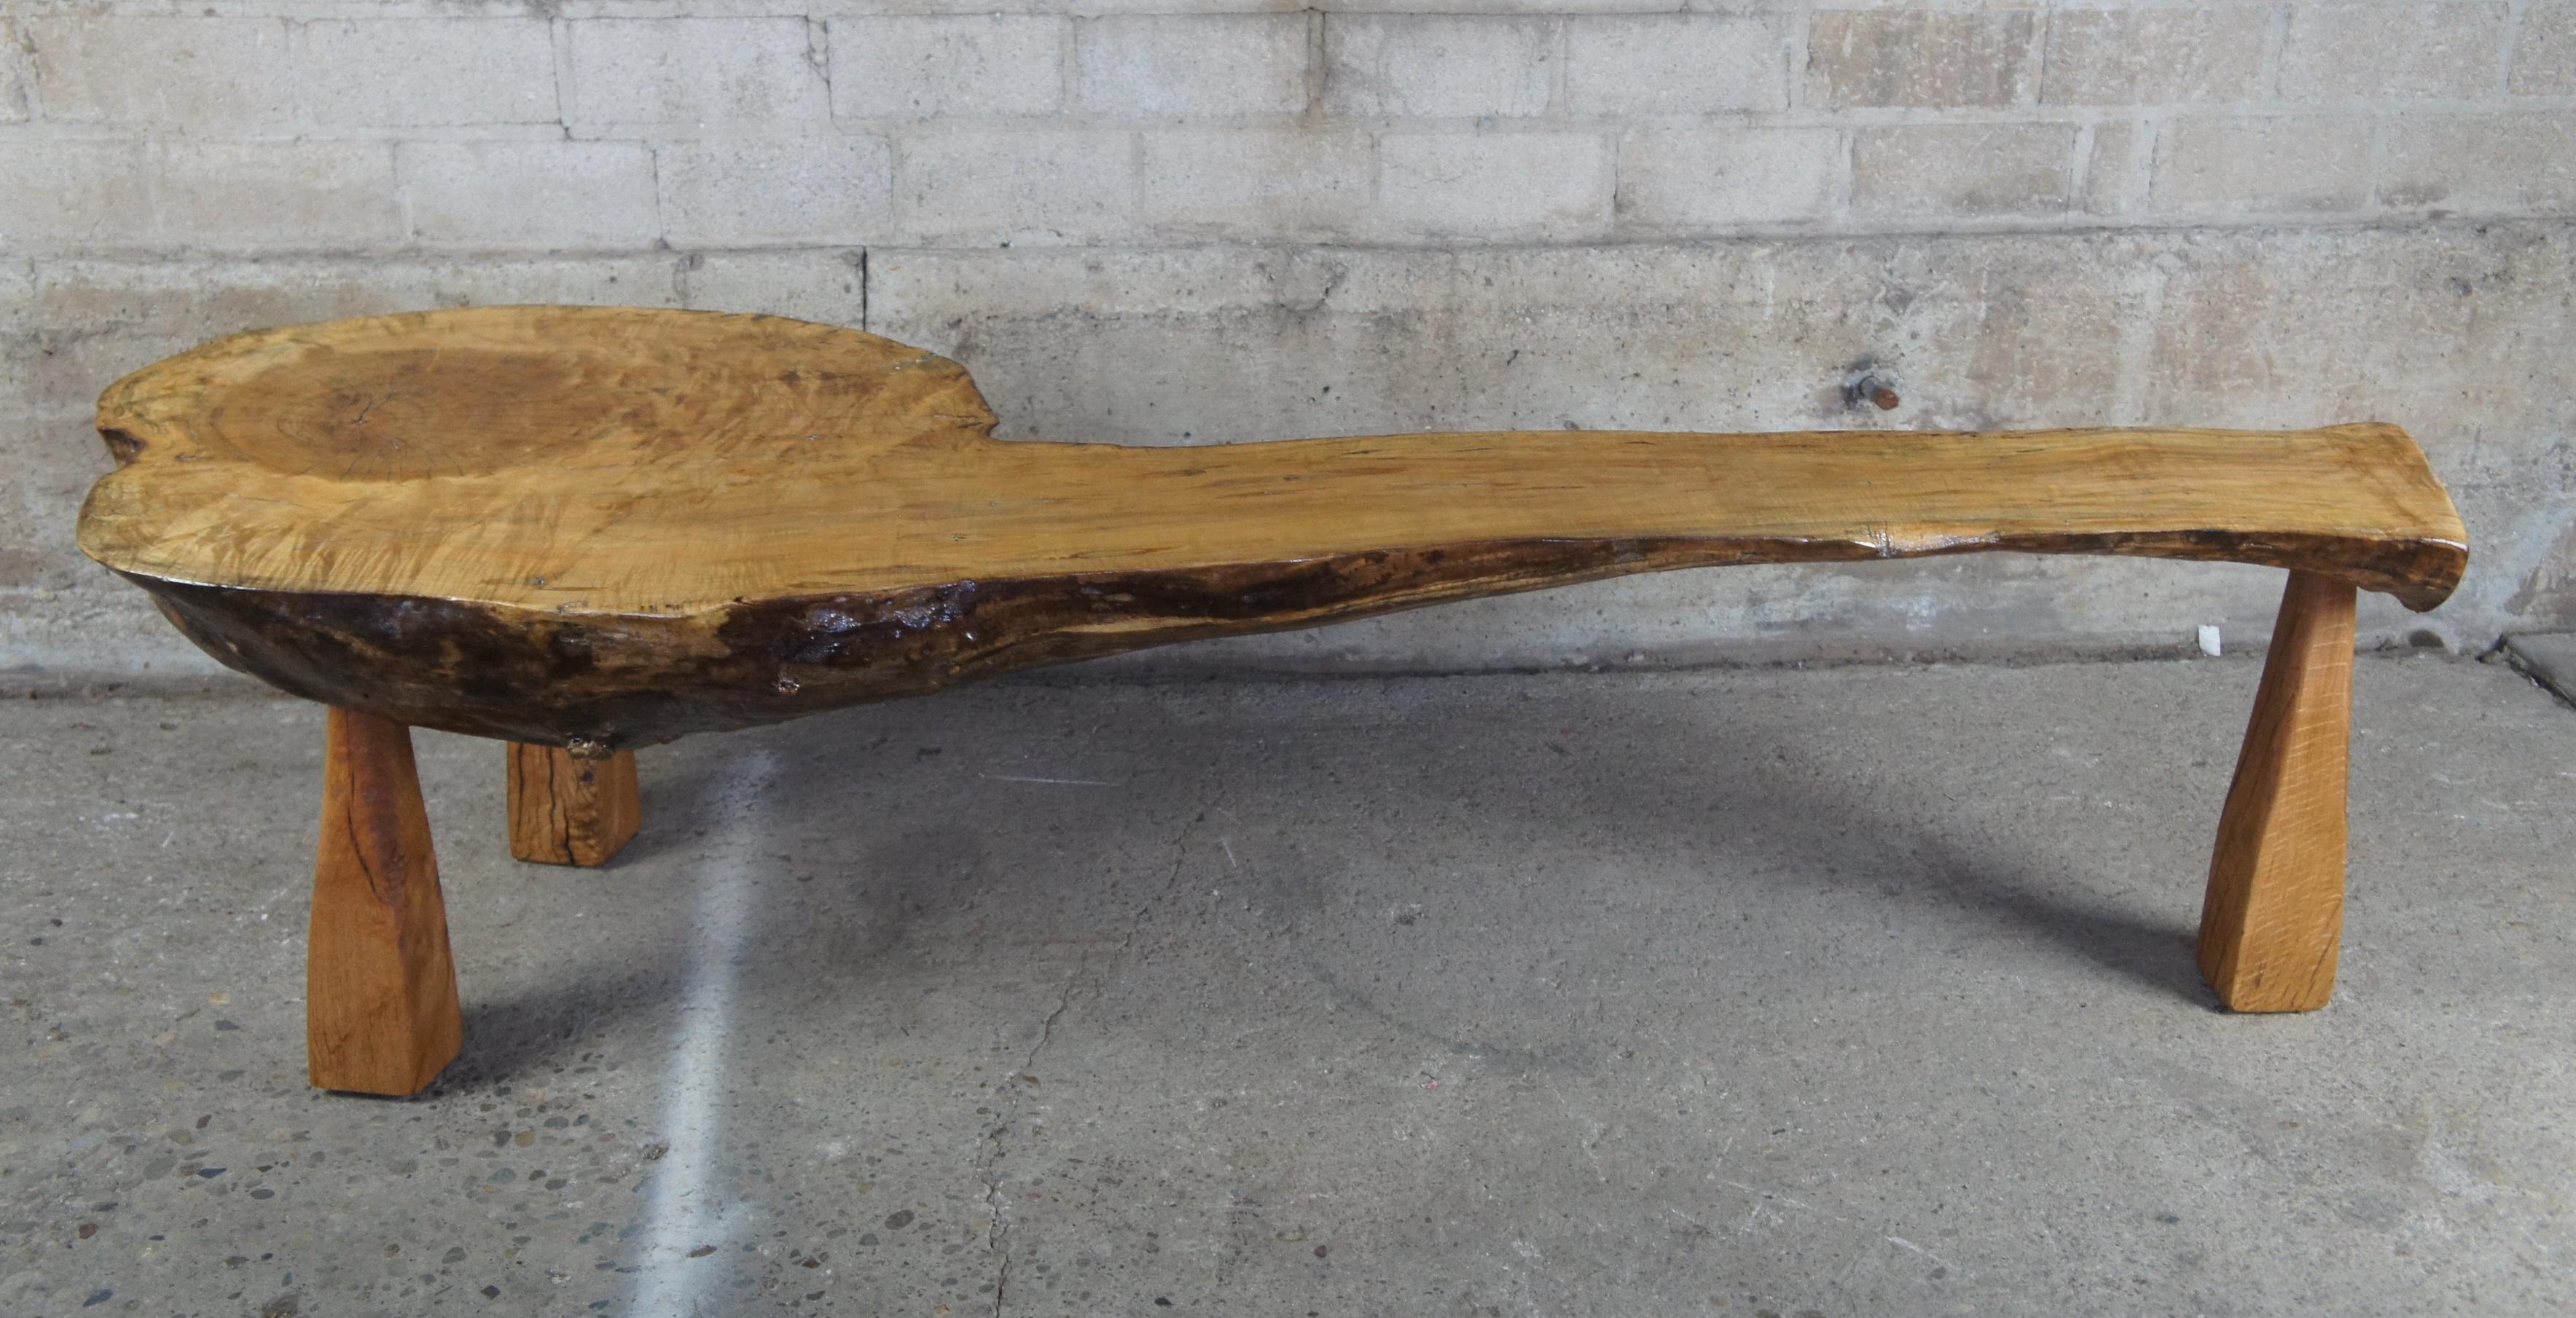 20th Century Ambrosia Maple Burl Live Edge Slab Coffee Table or Bench Arts & Crafts M. Baker